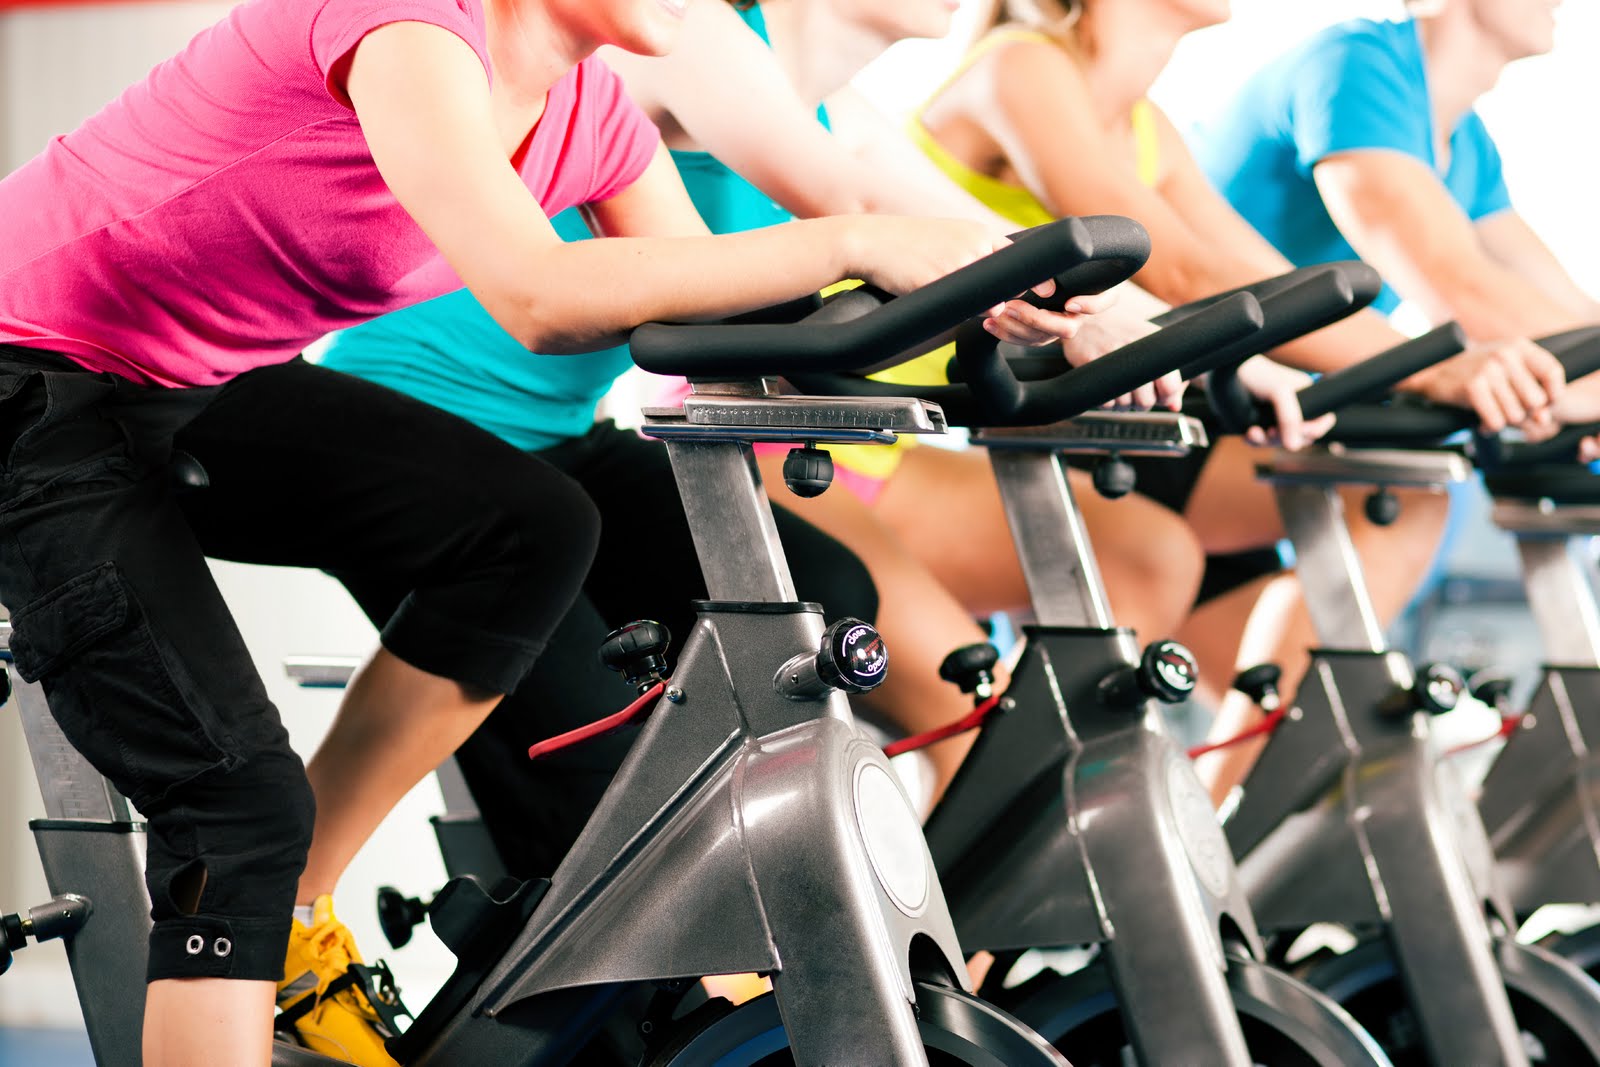 istock_000014641916xxlarge1-good-for-new-2014-am-spin-classes